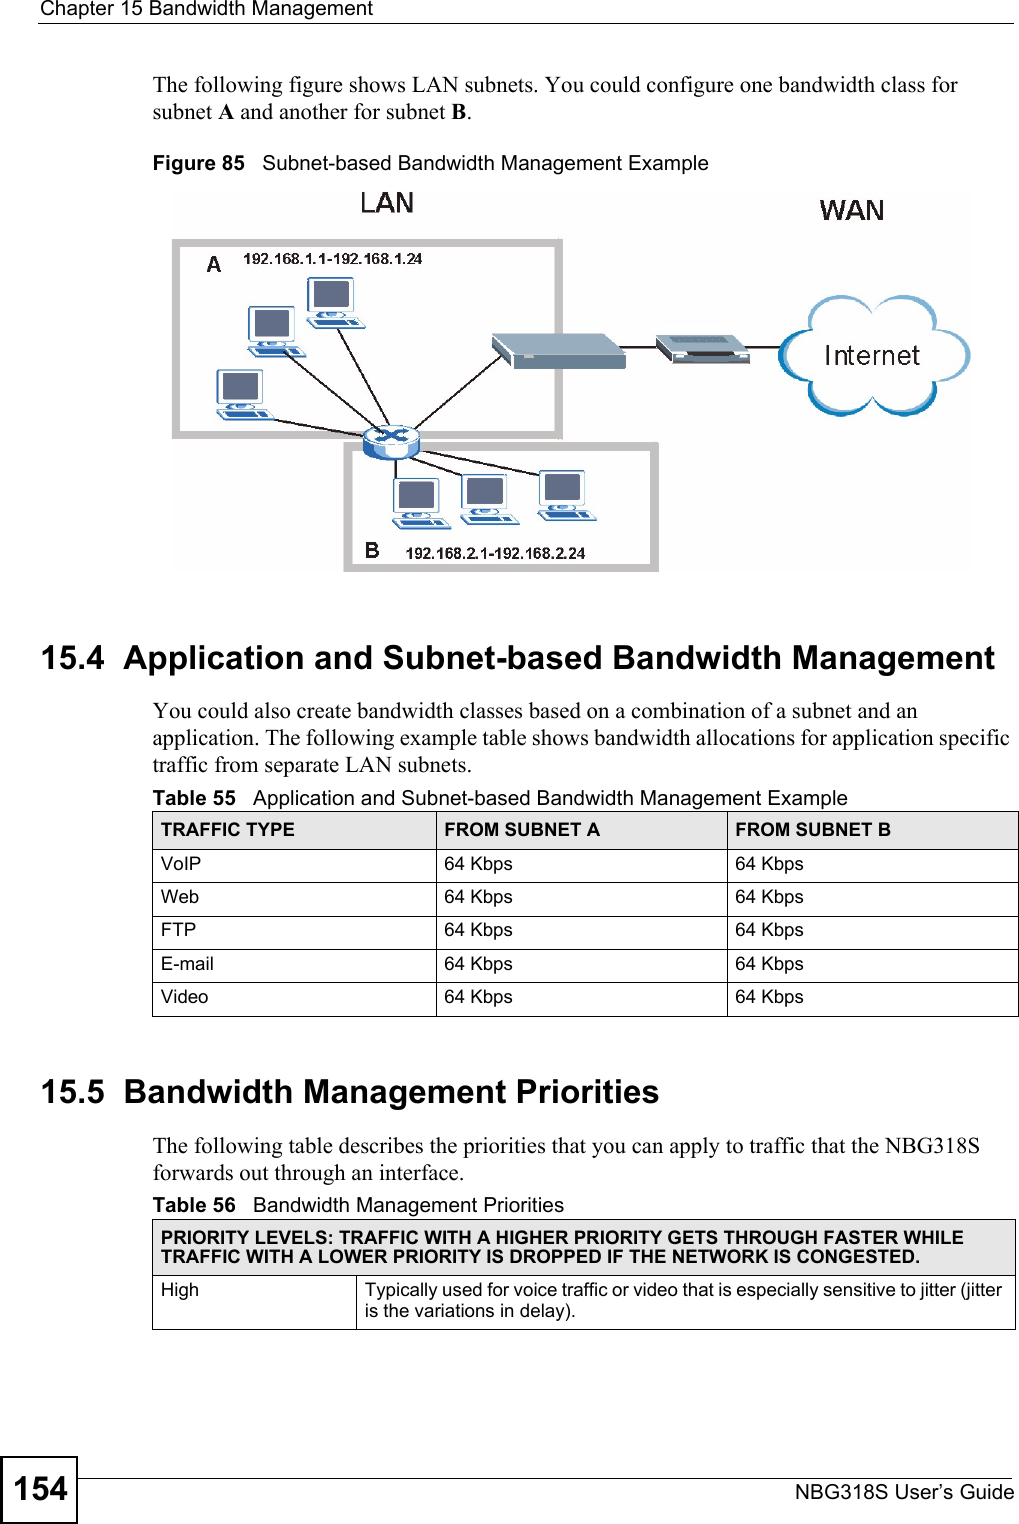 Chapter 15 Bandwidth ManagementNBG318S User’s Guide154The following figure shows LAN subnets. You could configure one bandwidth class for subnet A and another for subnet B. Figure 85   Subnet-based Bandwidth Management Example15.4  Application and Subnet-based Bandwidth ManagementYou could also create bandwidth classes based on a combination of a subnet and an application. The following example table shows bandwidth allocations for application specific traffic from separate LAN subnets.15.5  Bandwidth Management Priorities The following table describes the priorities that you can apply to traffic that the NBG318S forwards out through an interface.Table 55   Application and Subnet-based Bandwidth Management Example TRAFFIC TYPE FROM SUBNET A FROM SUBNET BVoIP 64 Kbps 64 KbpsWeb 64 Kbps 64 KbpsFTP 64 Kbps 64 KbpsE-mail 64 Kbps 64 KbpsVideo 64 Kbps 64 KbpsTable 56   Bandwidth Management PrioritiesPRIORITY LEVELS: TRAFFIC WITH A HIGHER PRIORITY GETS THROUGH FASTER WHILE TRAFFIC WITH A LOWER PRIORITY IS DROPPED IF THE NETWORK IS CONGESTED.High Typically used for voice traffic or video that is especially sensitive to jitter (jitter is the variations in delay).